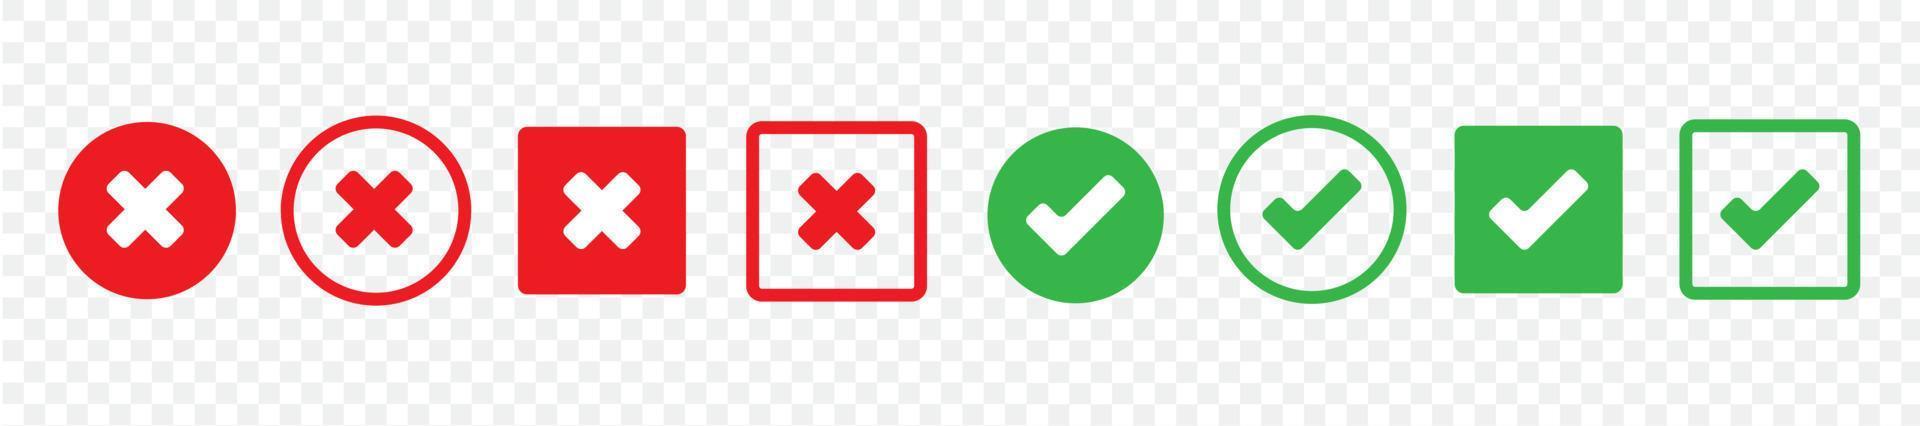 Set green check marks and red crosses of simple web buttons. Circle and square. Large collection of flat buttons. Vector